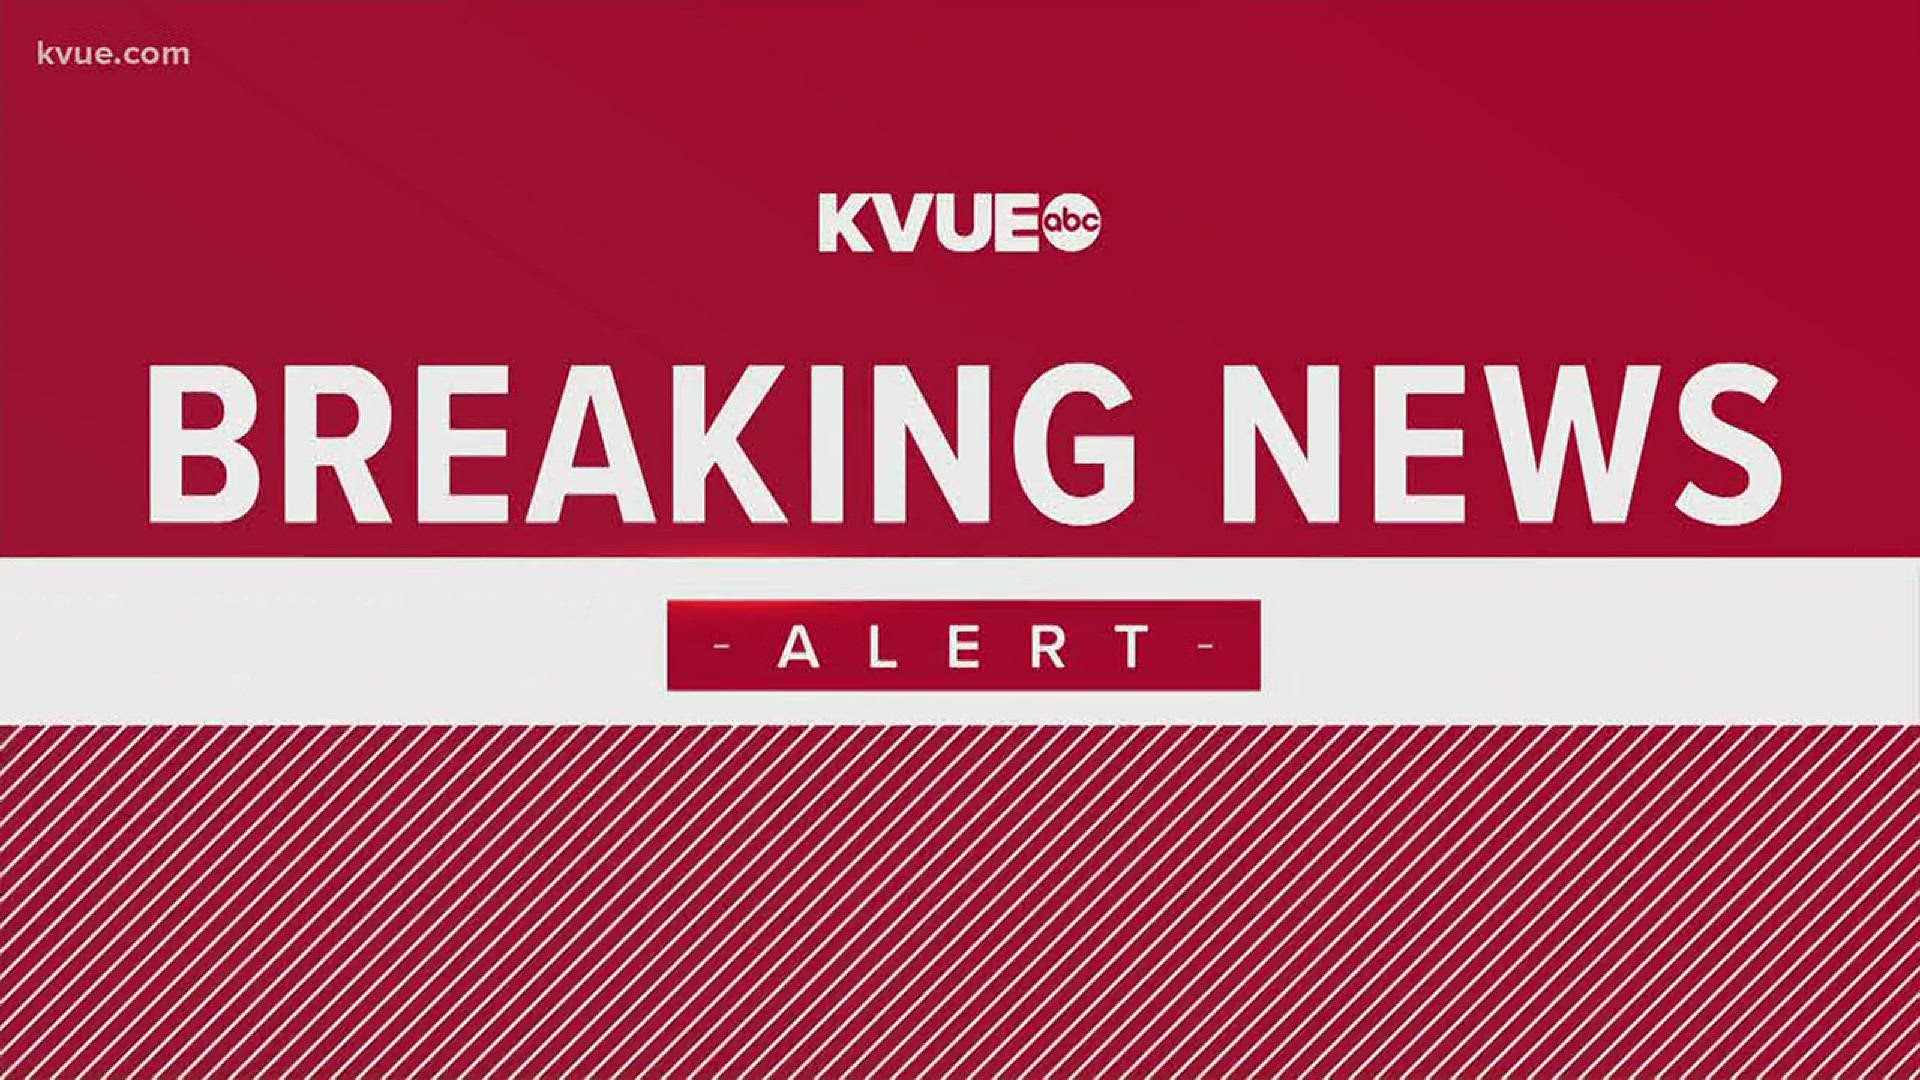 The lockdown at Akins High School in south Austin has been lifted